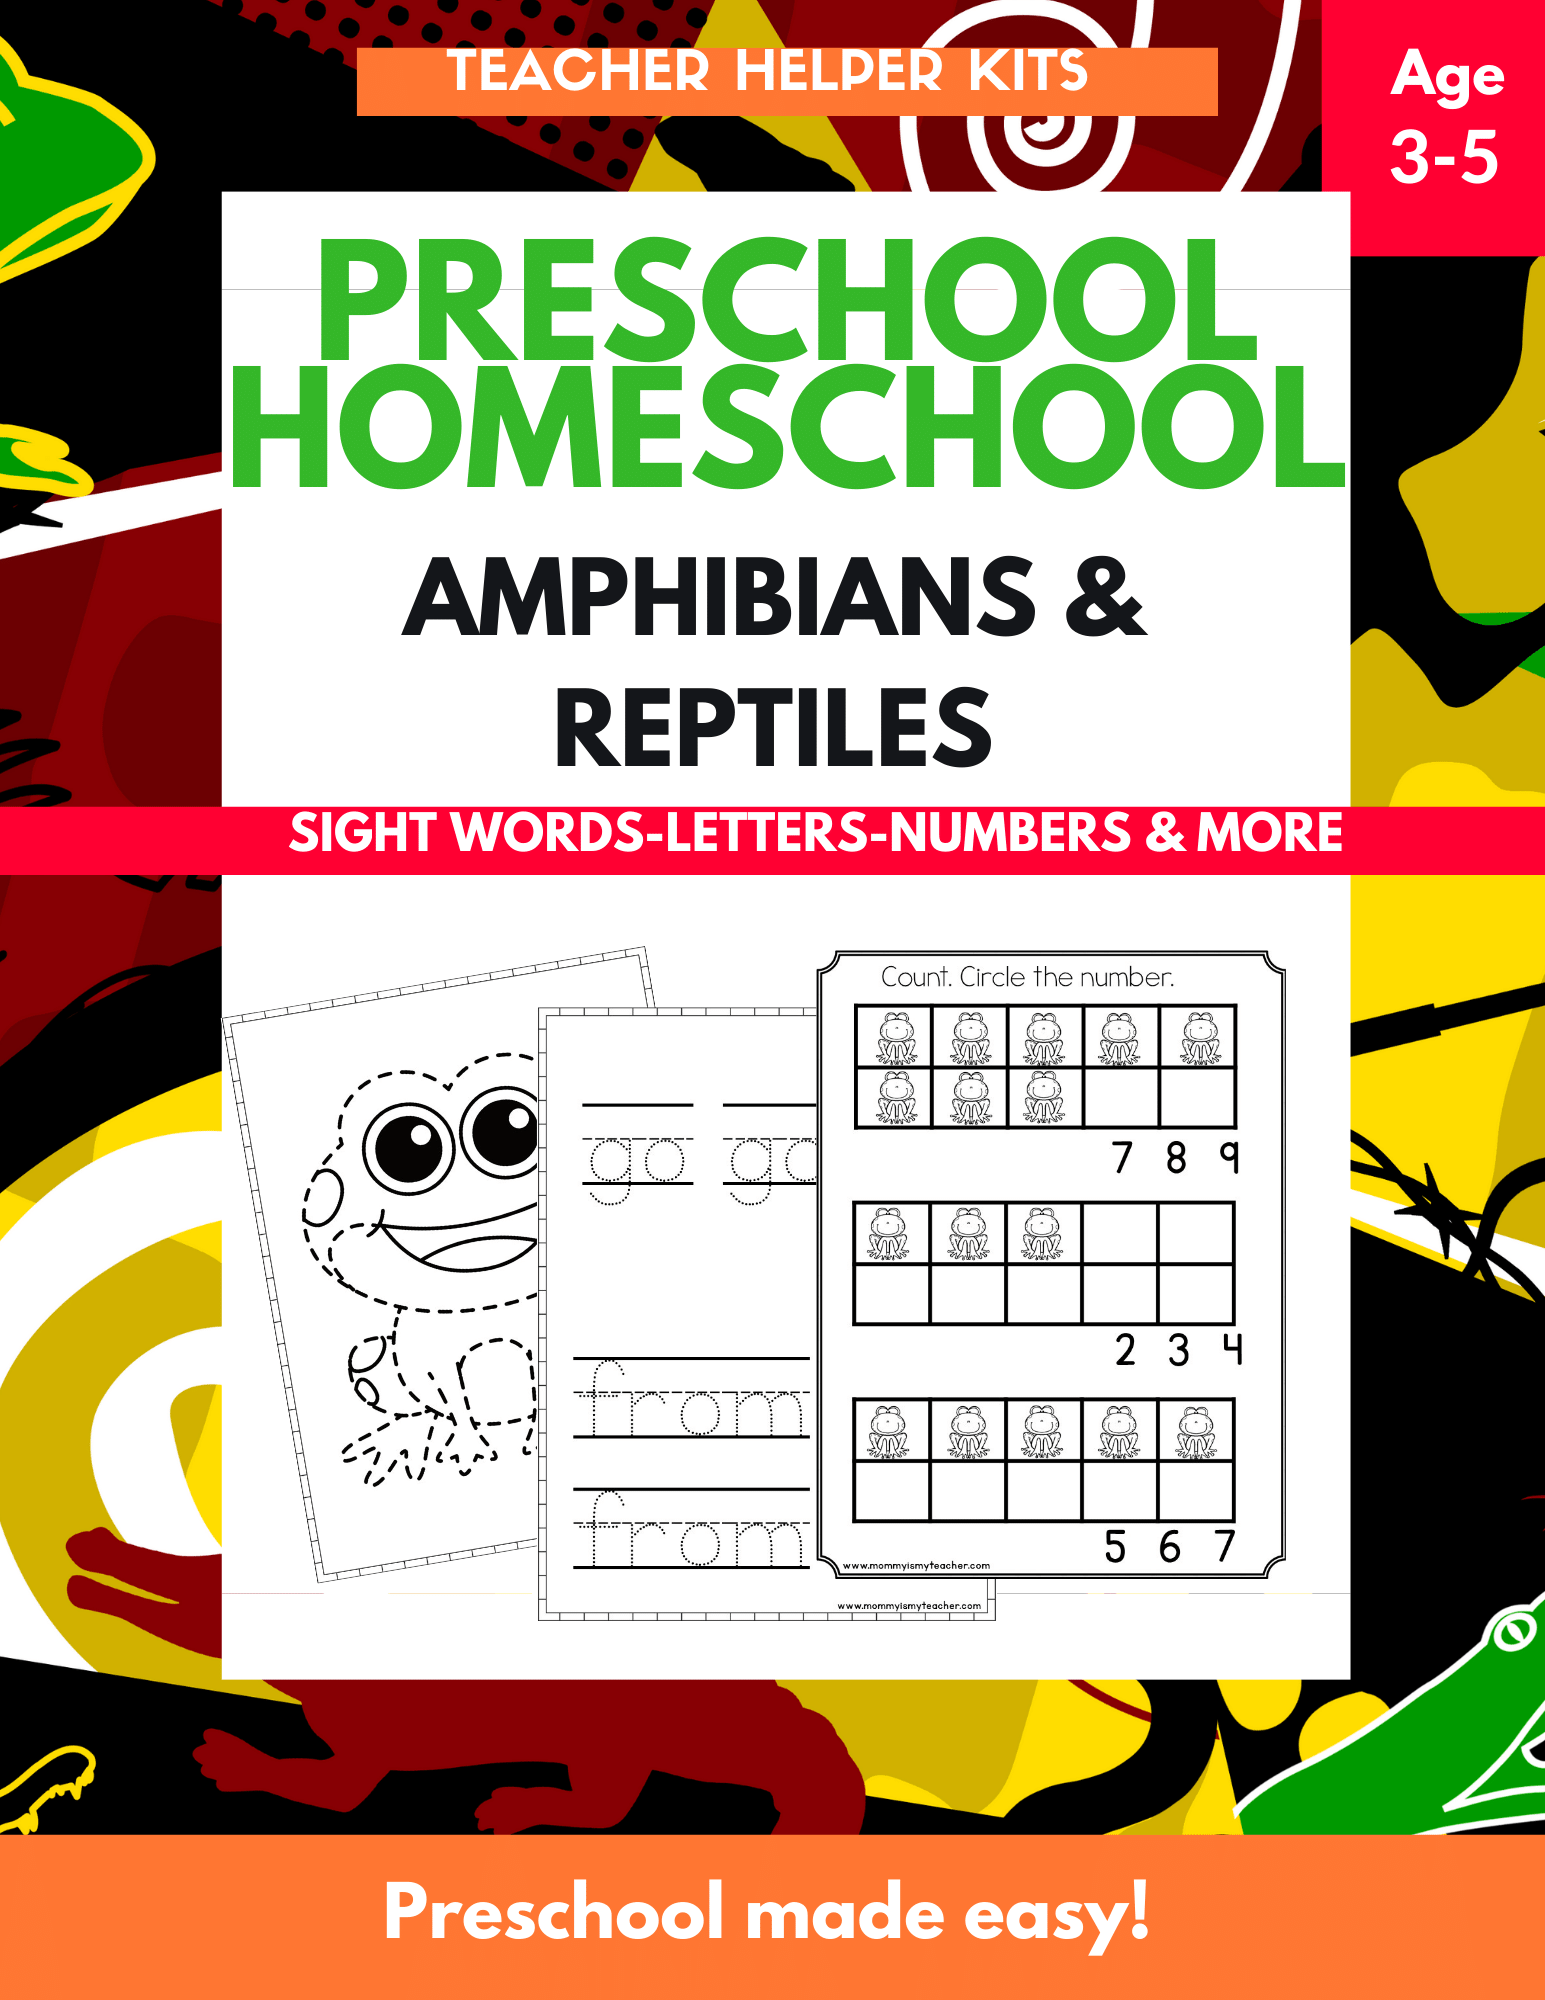 AMPHIBIANS AND REPTILES COVER-2.png